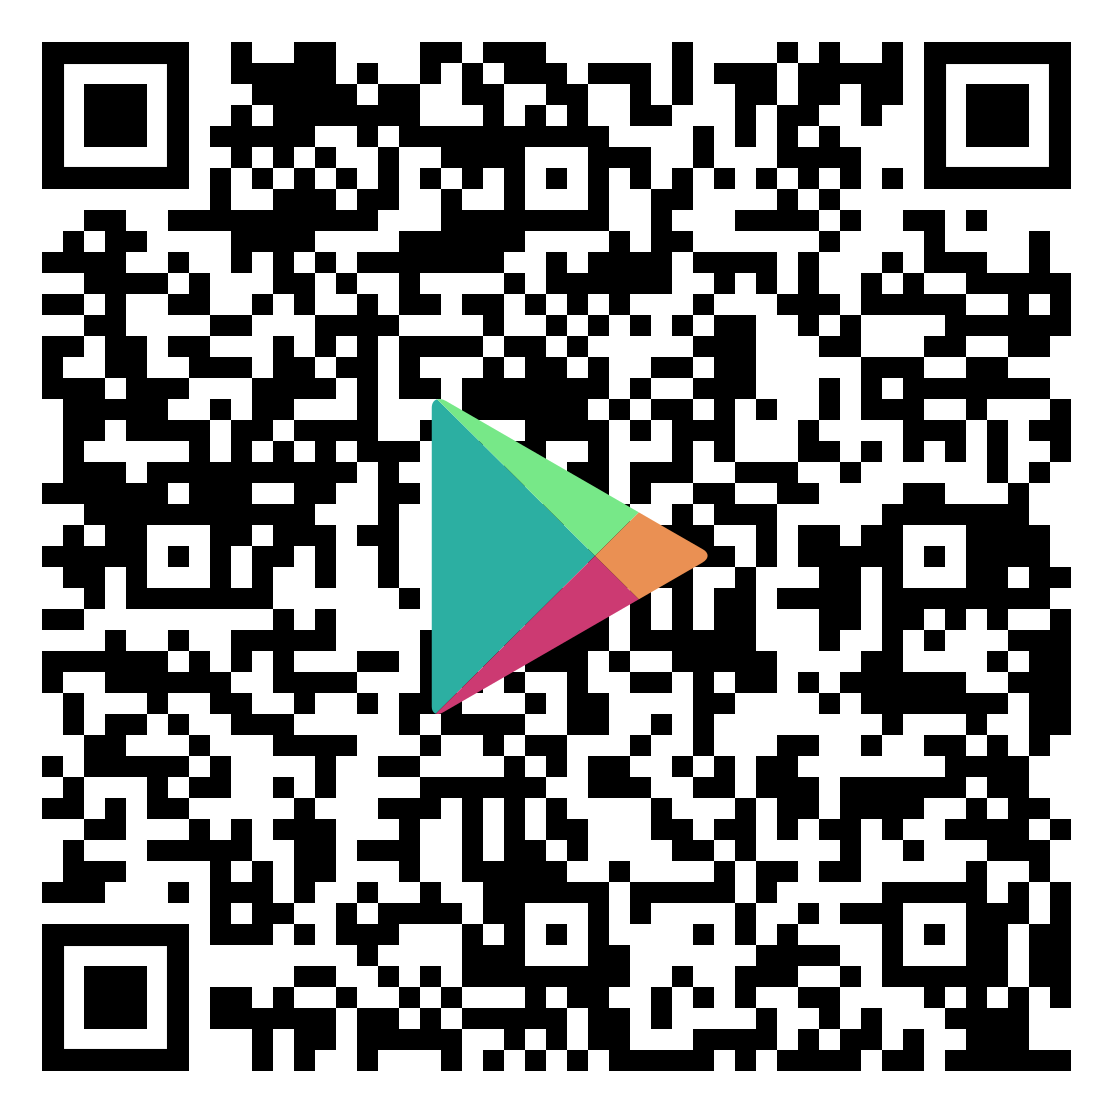 QR Code to Parent Square app in Google Play Store